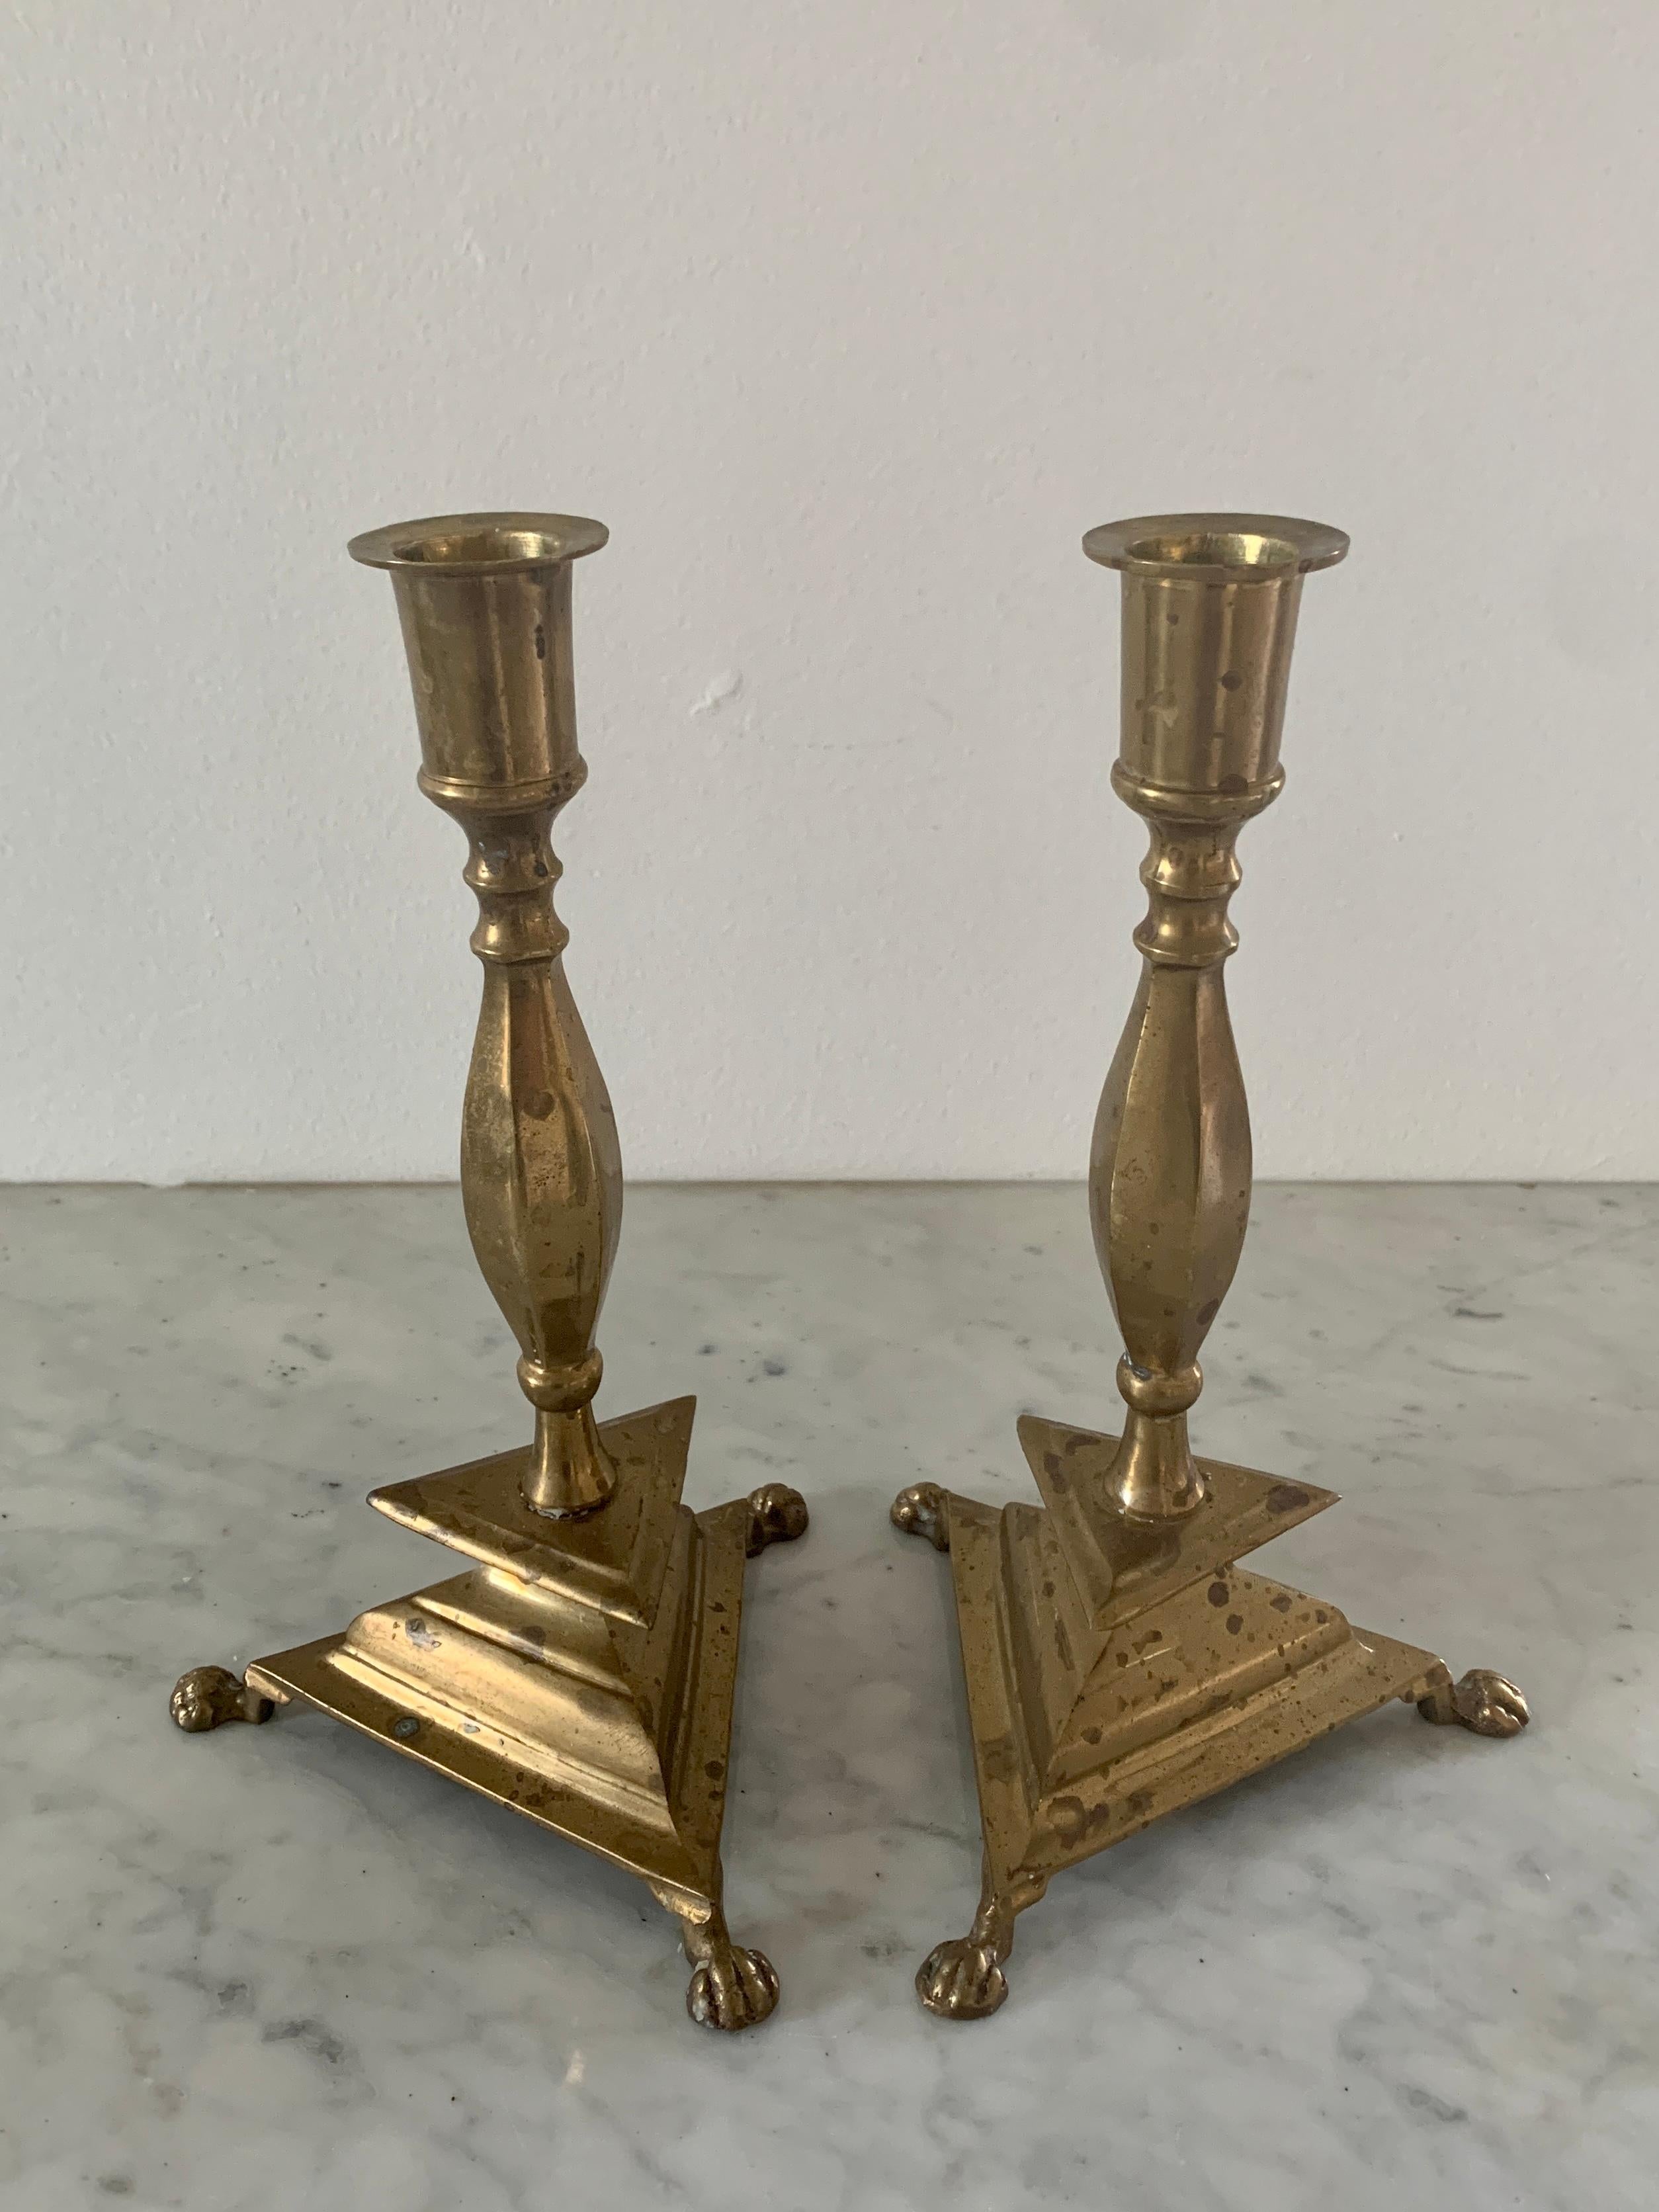 Neoclassical Brass Paw Foot Candlestick Holders, Pair For Sale 4